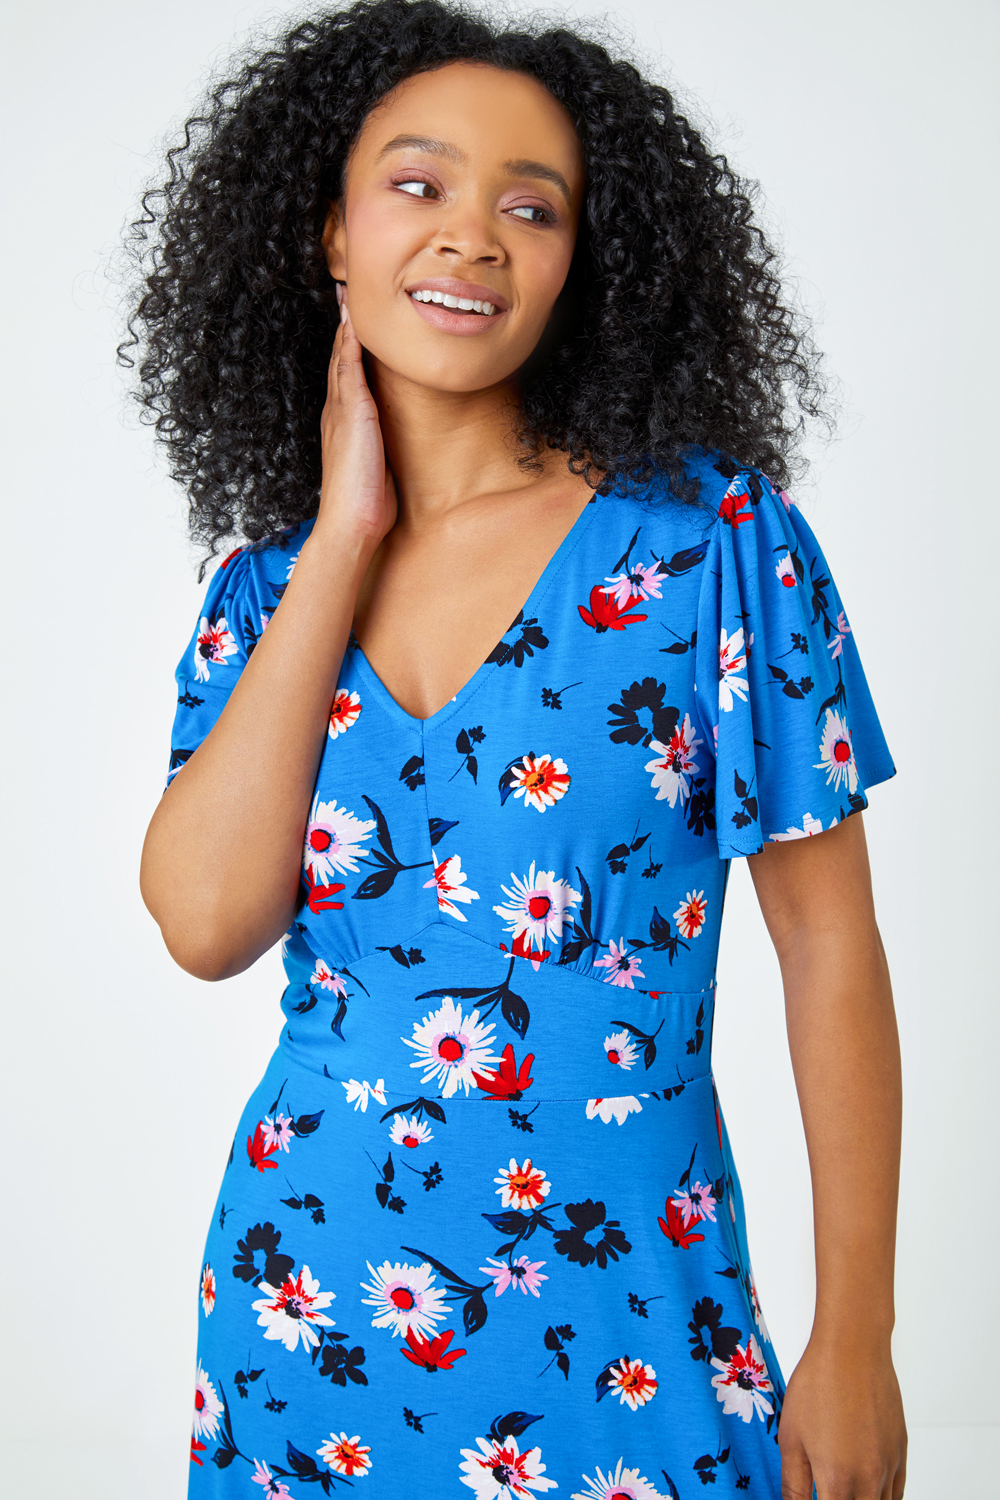 Turquoise Petite Floral Print Stretch Dress, Image 4 of 5